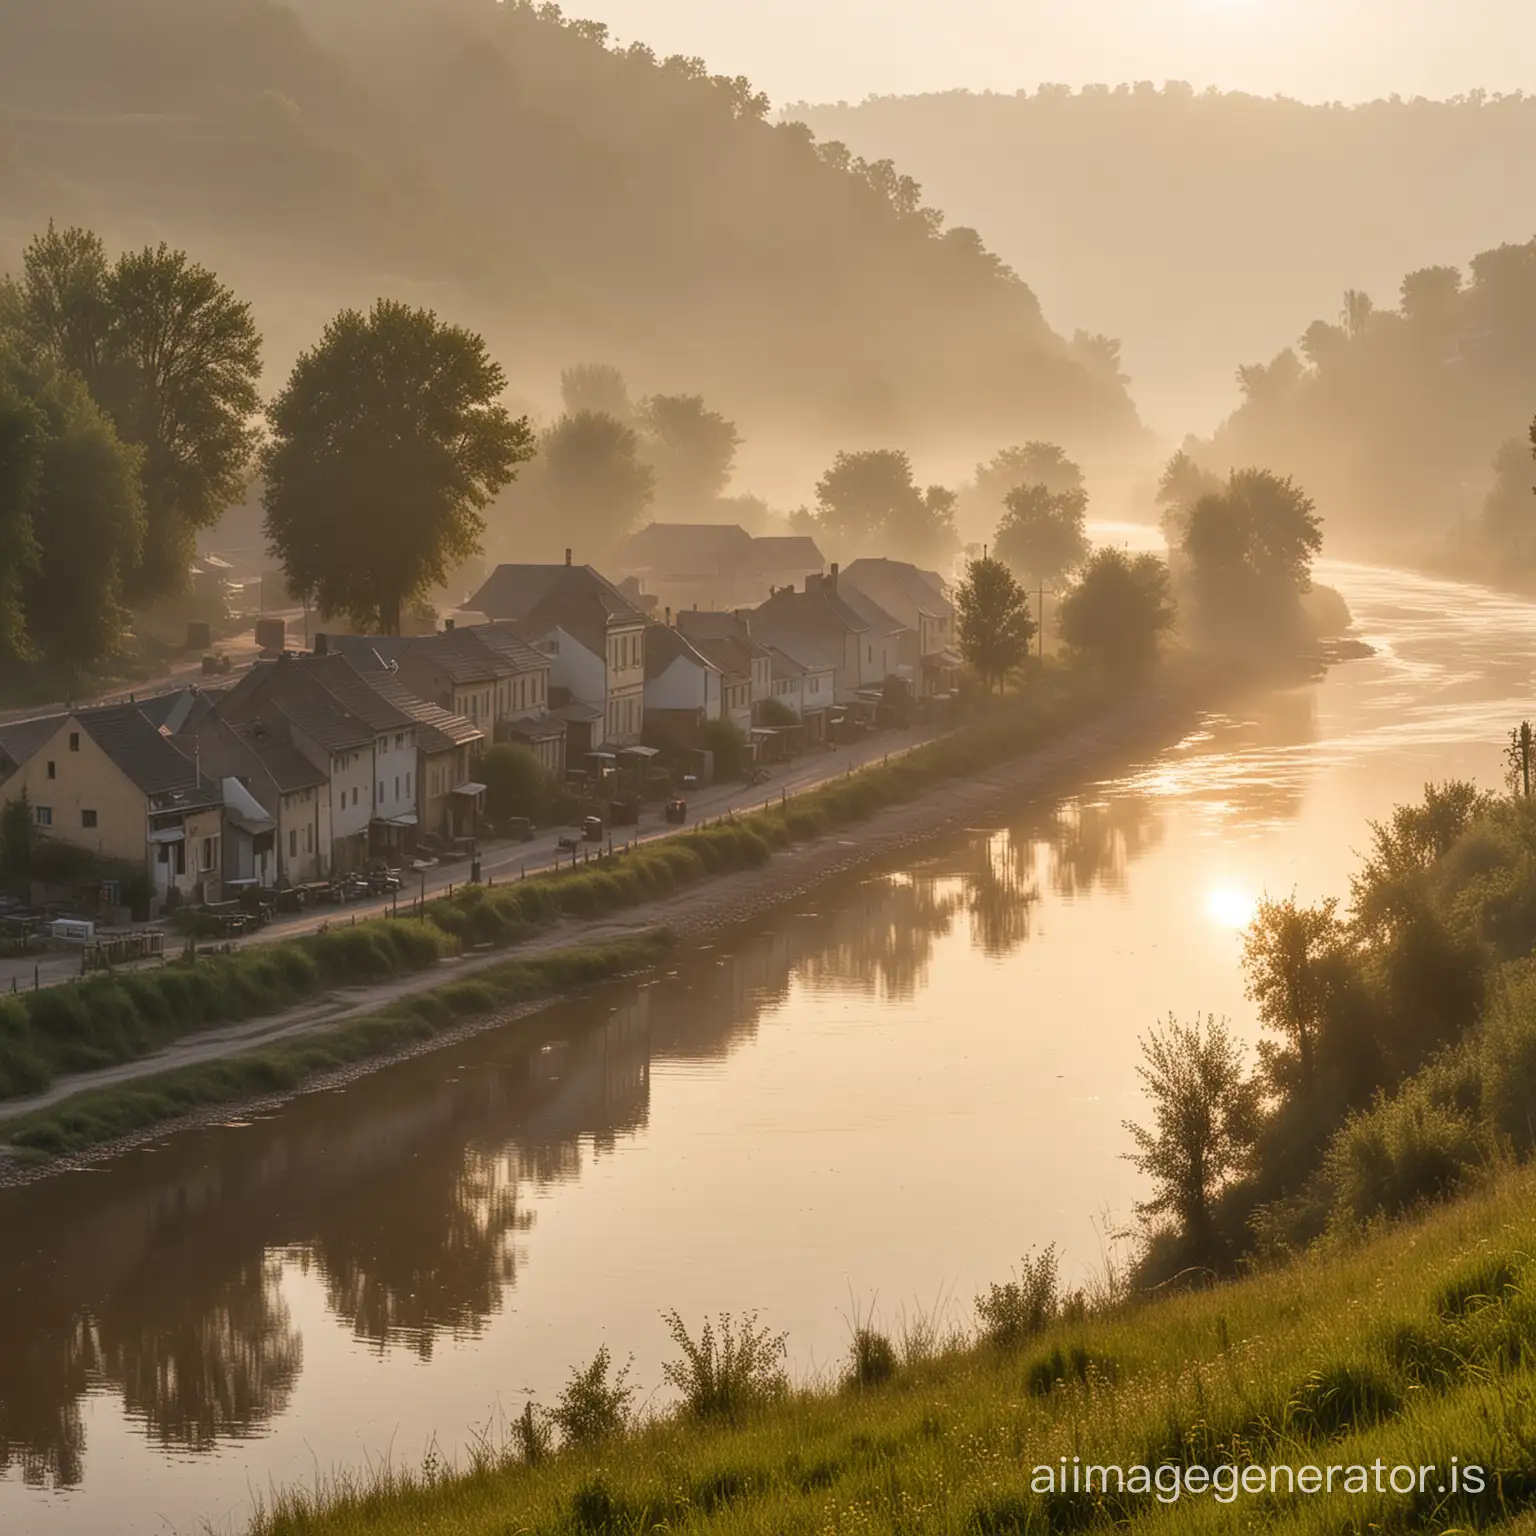 A small village is visible on the bank of a beautiful river. The hazy sun rises from the bank.